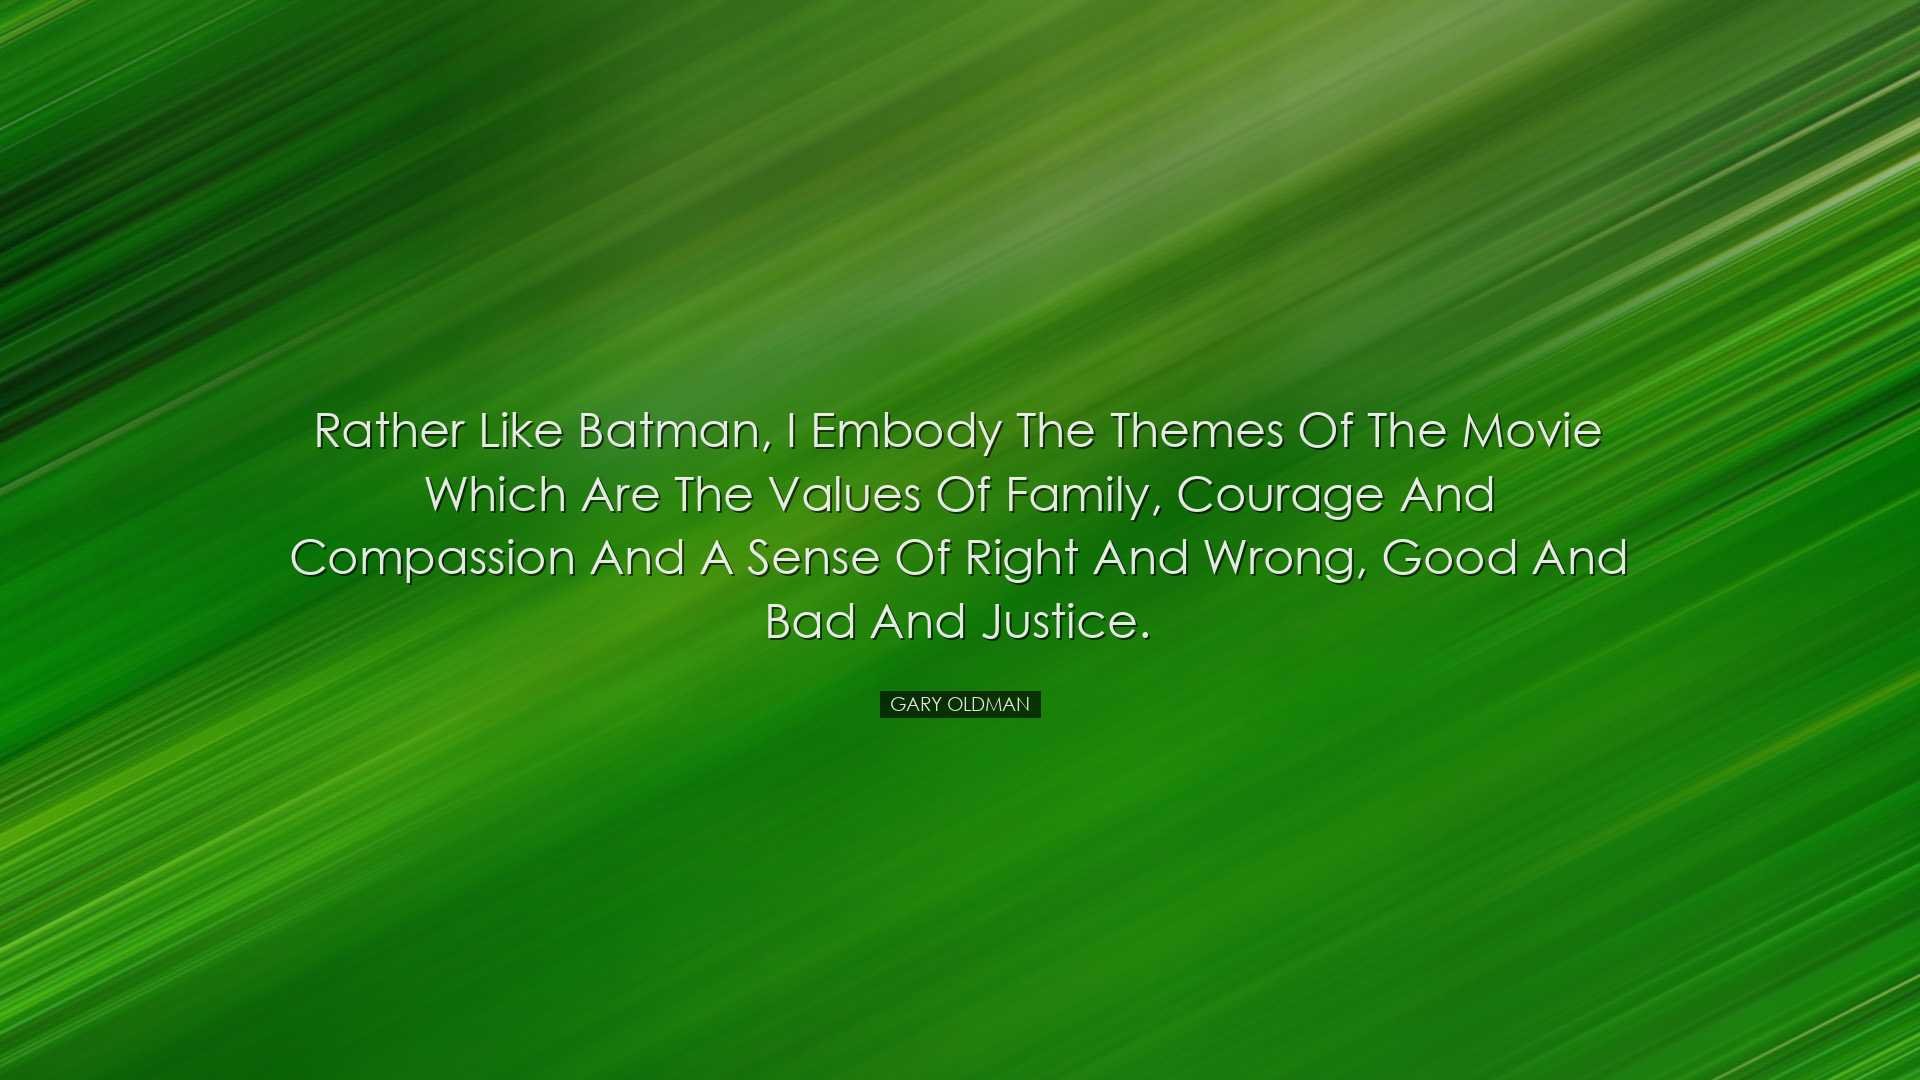 Rather like Batman, I embody the themes of the movie which are the